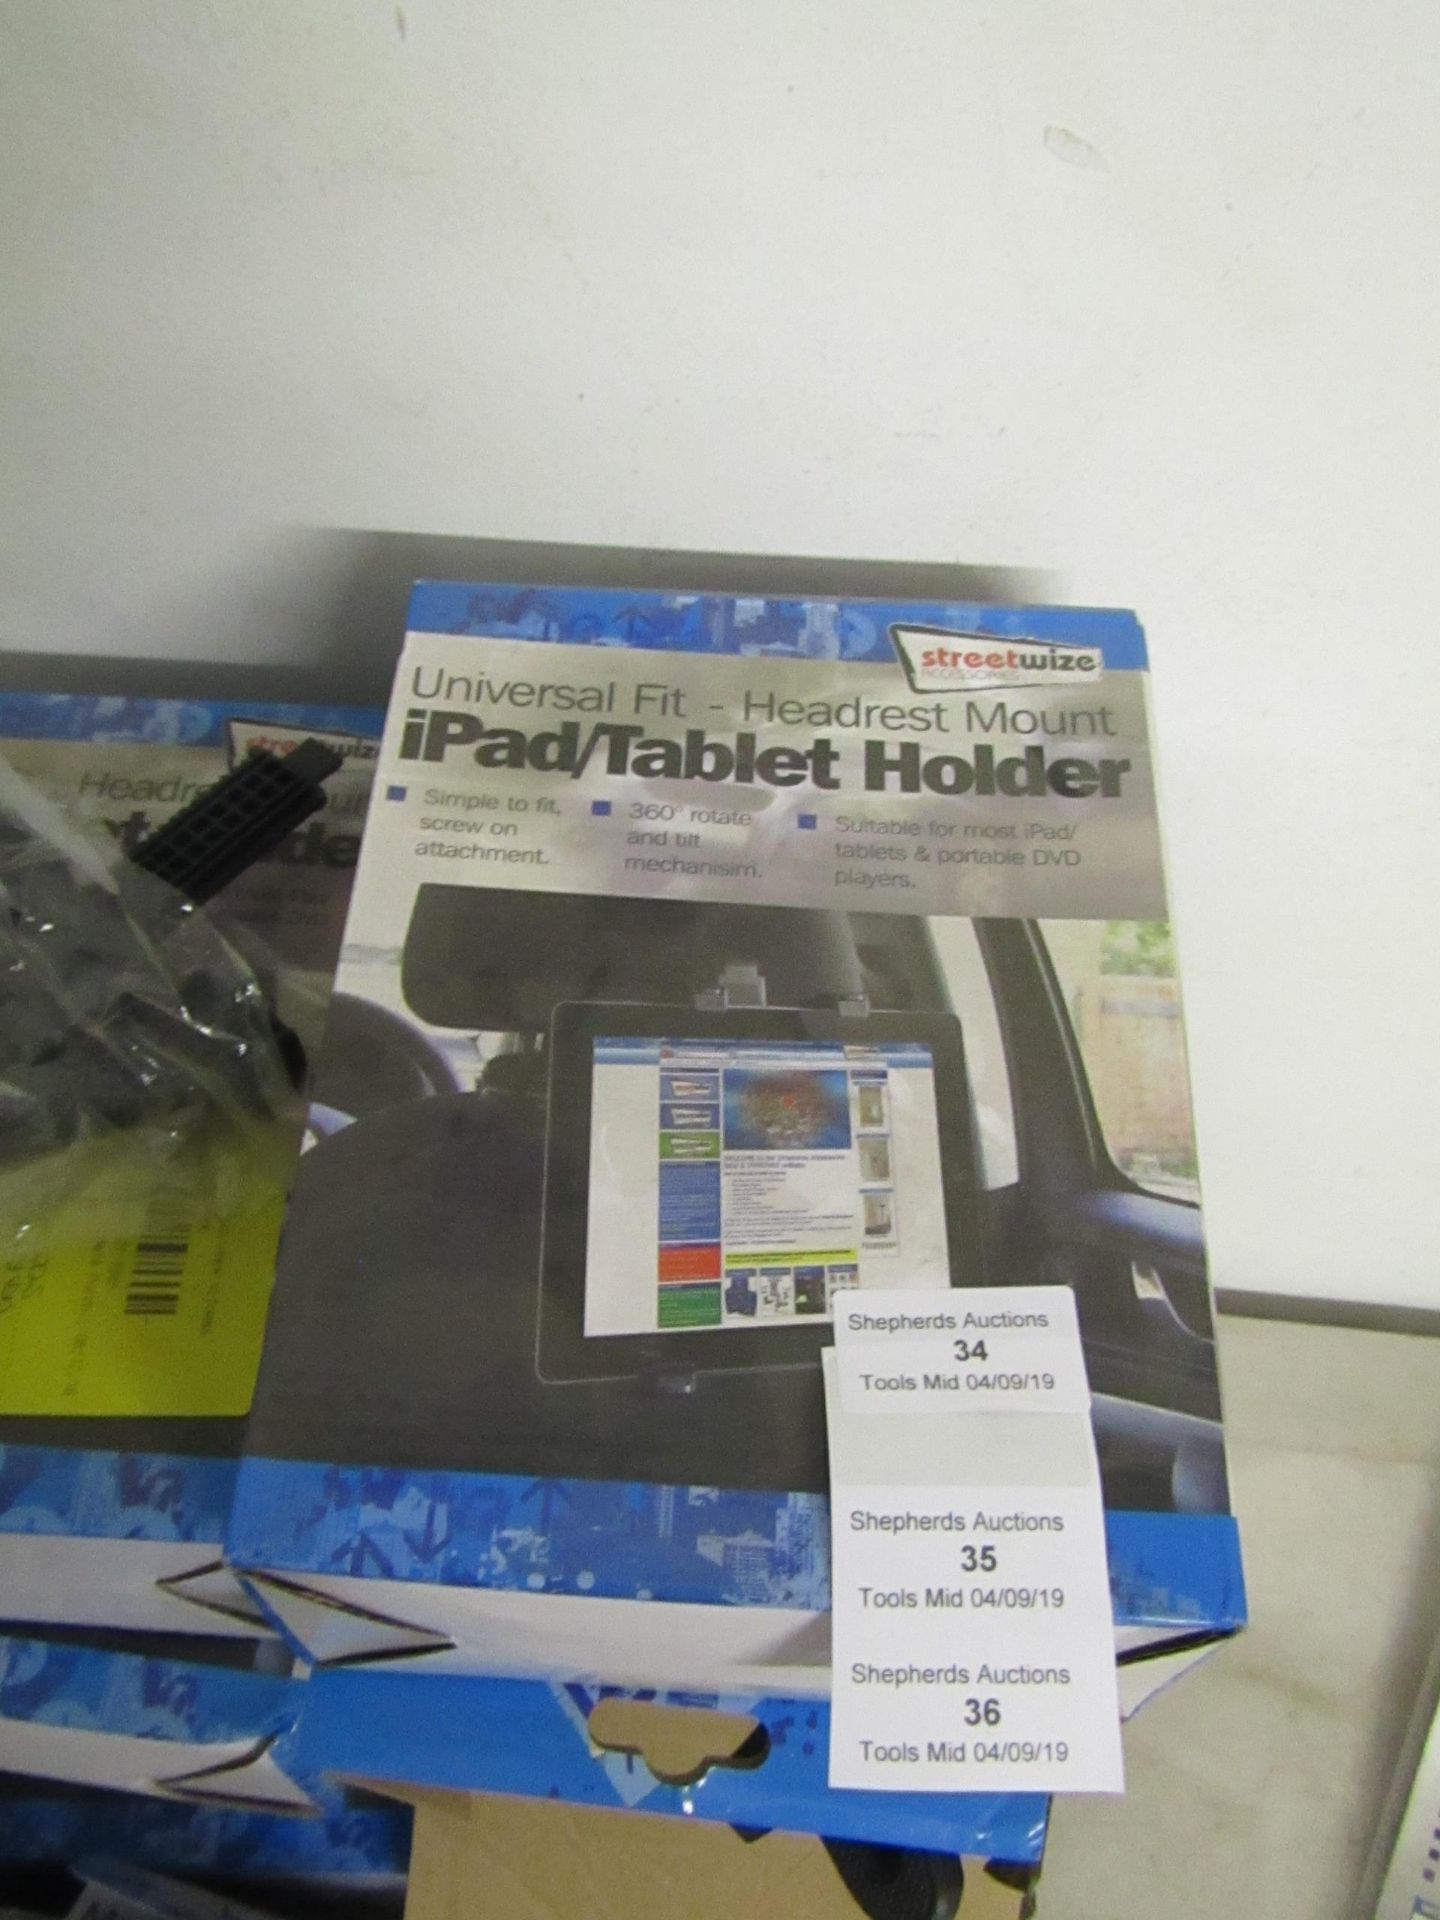 2x Streetwize universal tablet/iPad holder, both unchecked and boxed.